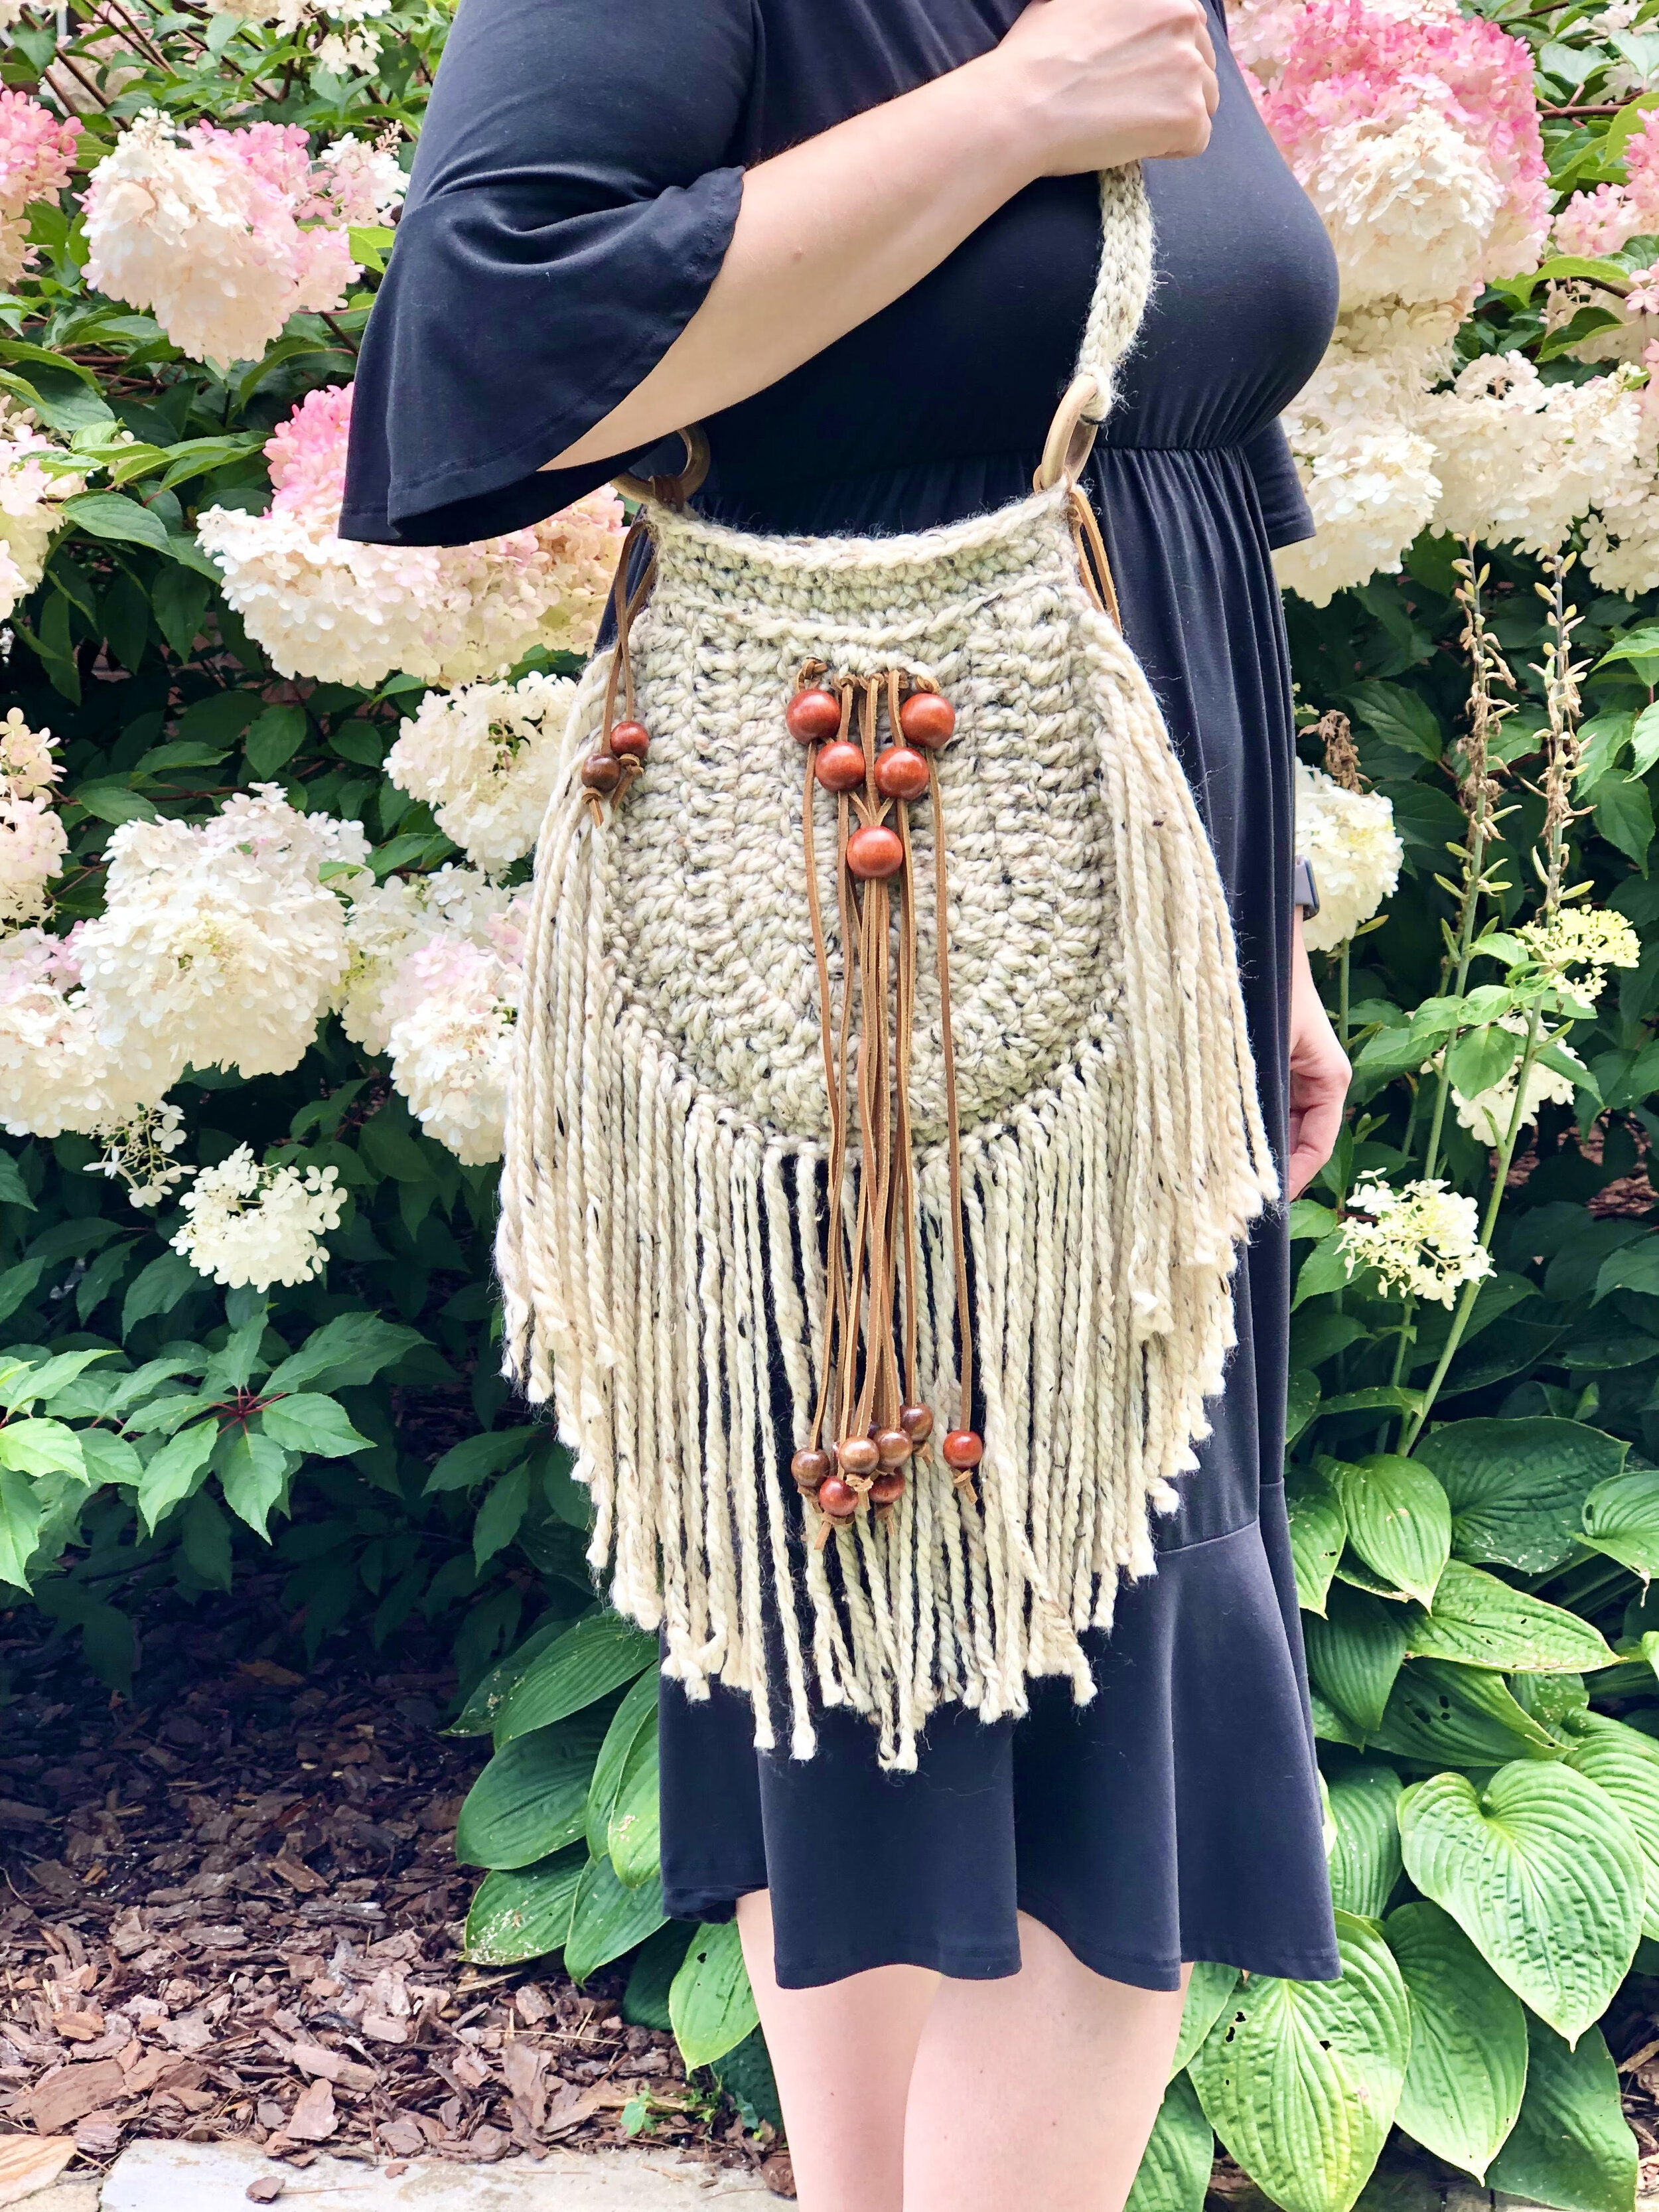 AMERICAN DARLING CONCEAL CARRY AZTEC FRINGE PURSE | PURSE | FREDERICKSBURG  – Yee Haw Ranch Outfitters